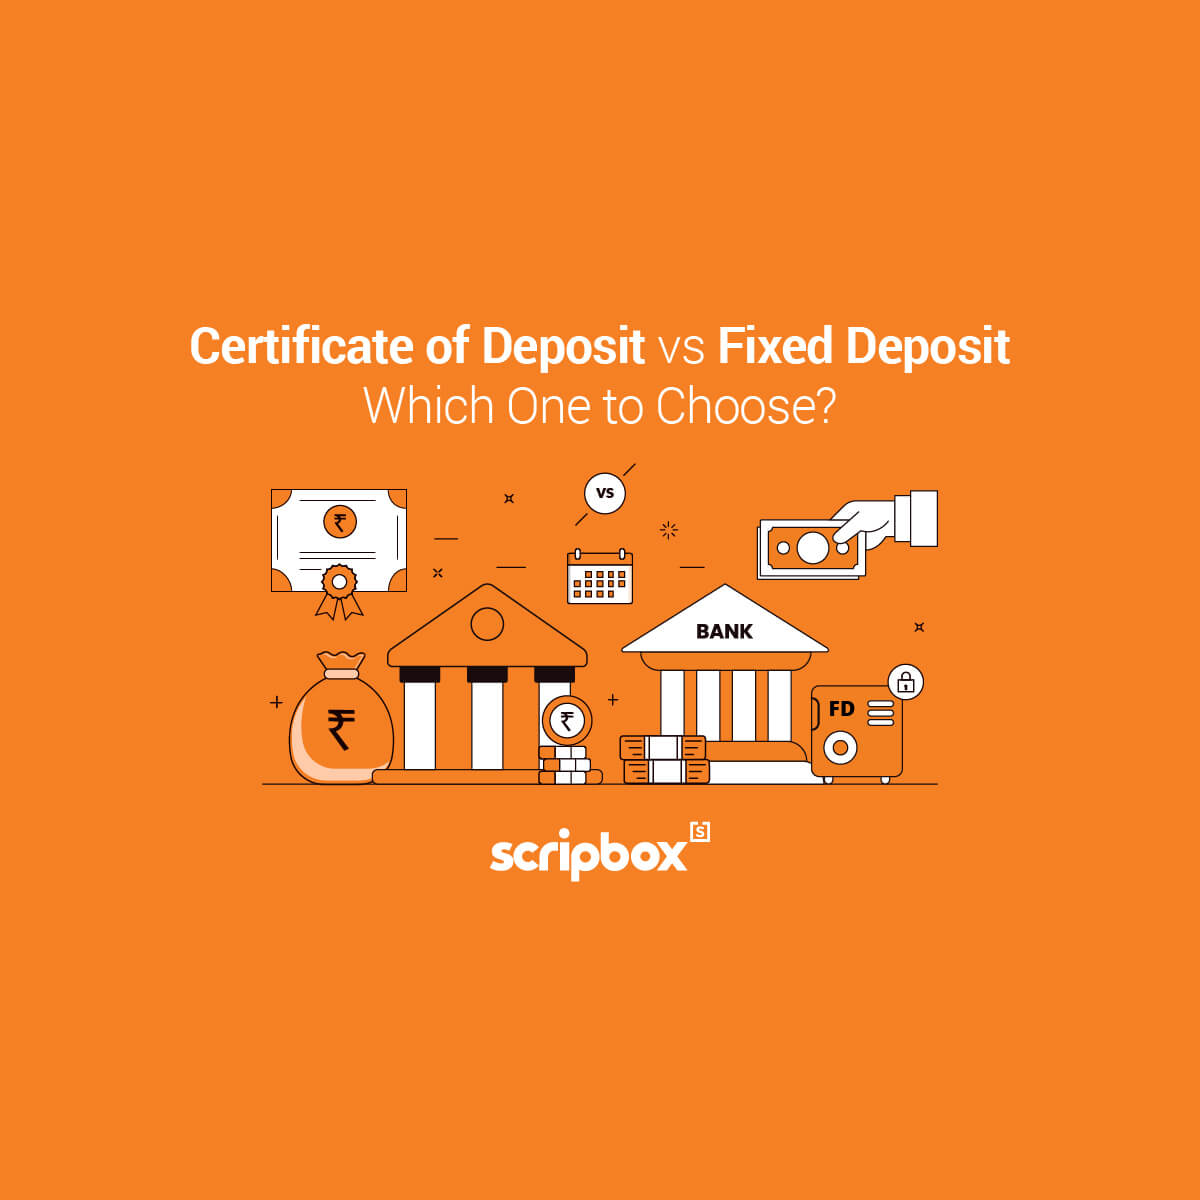 Certificate of Deposit vs Fixed Deposit Which One to Choose?